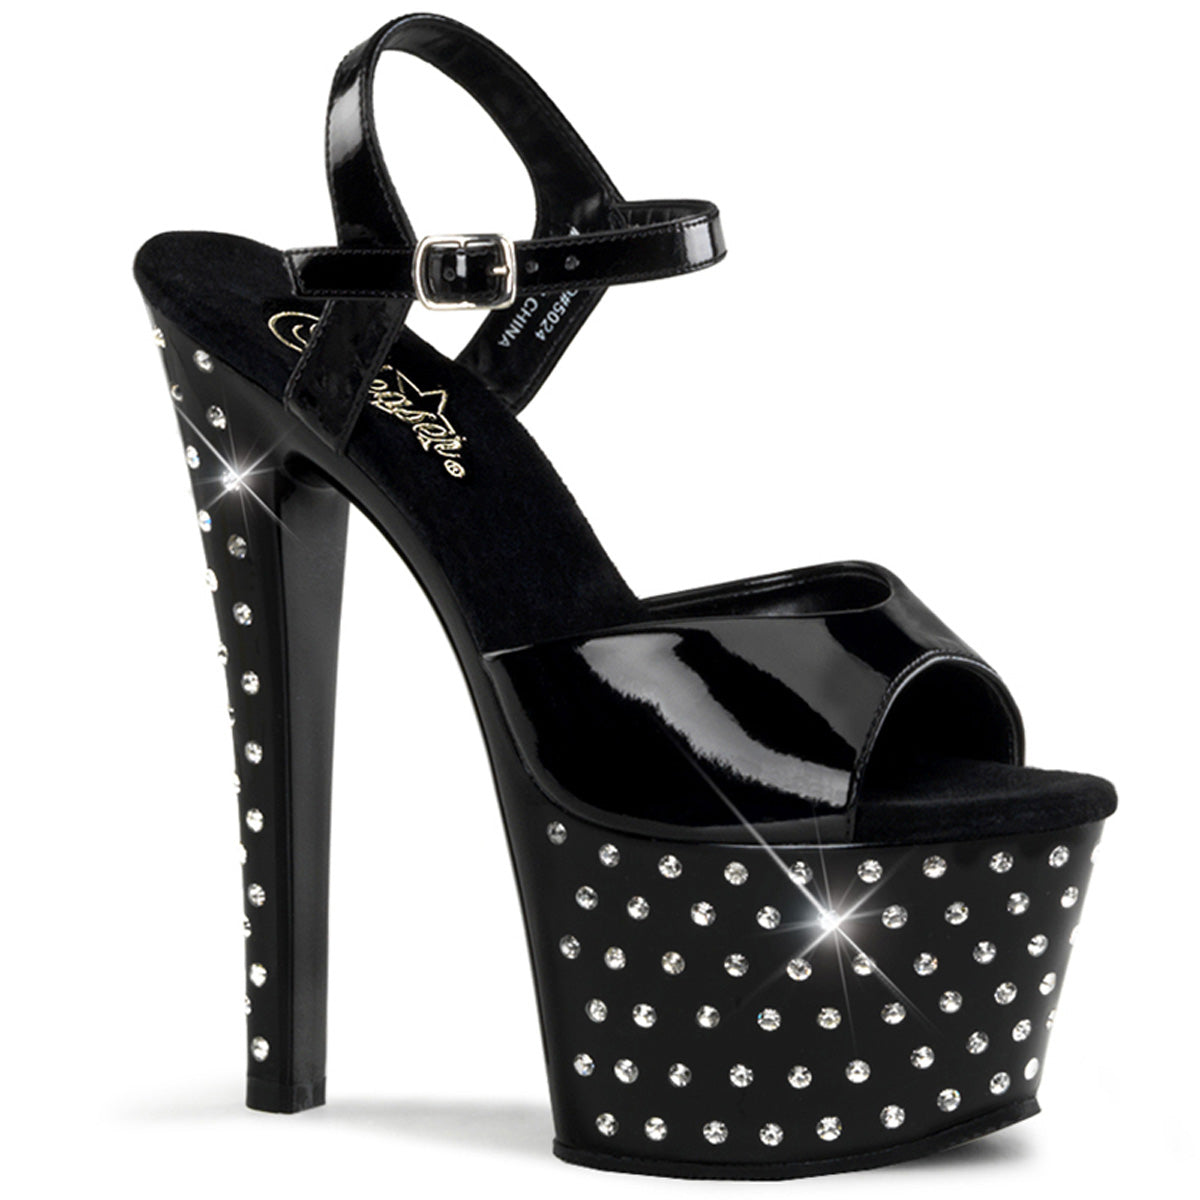 STARDUST-709 7 Inch Heel Black Patent Pole Dancing Platforms-Pleaser- Sexy Shoes